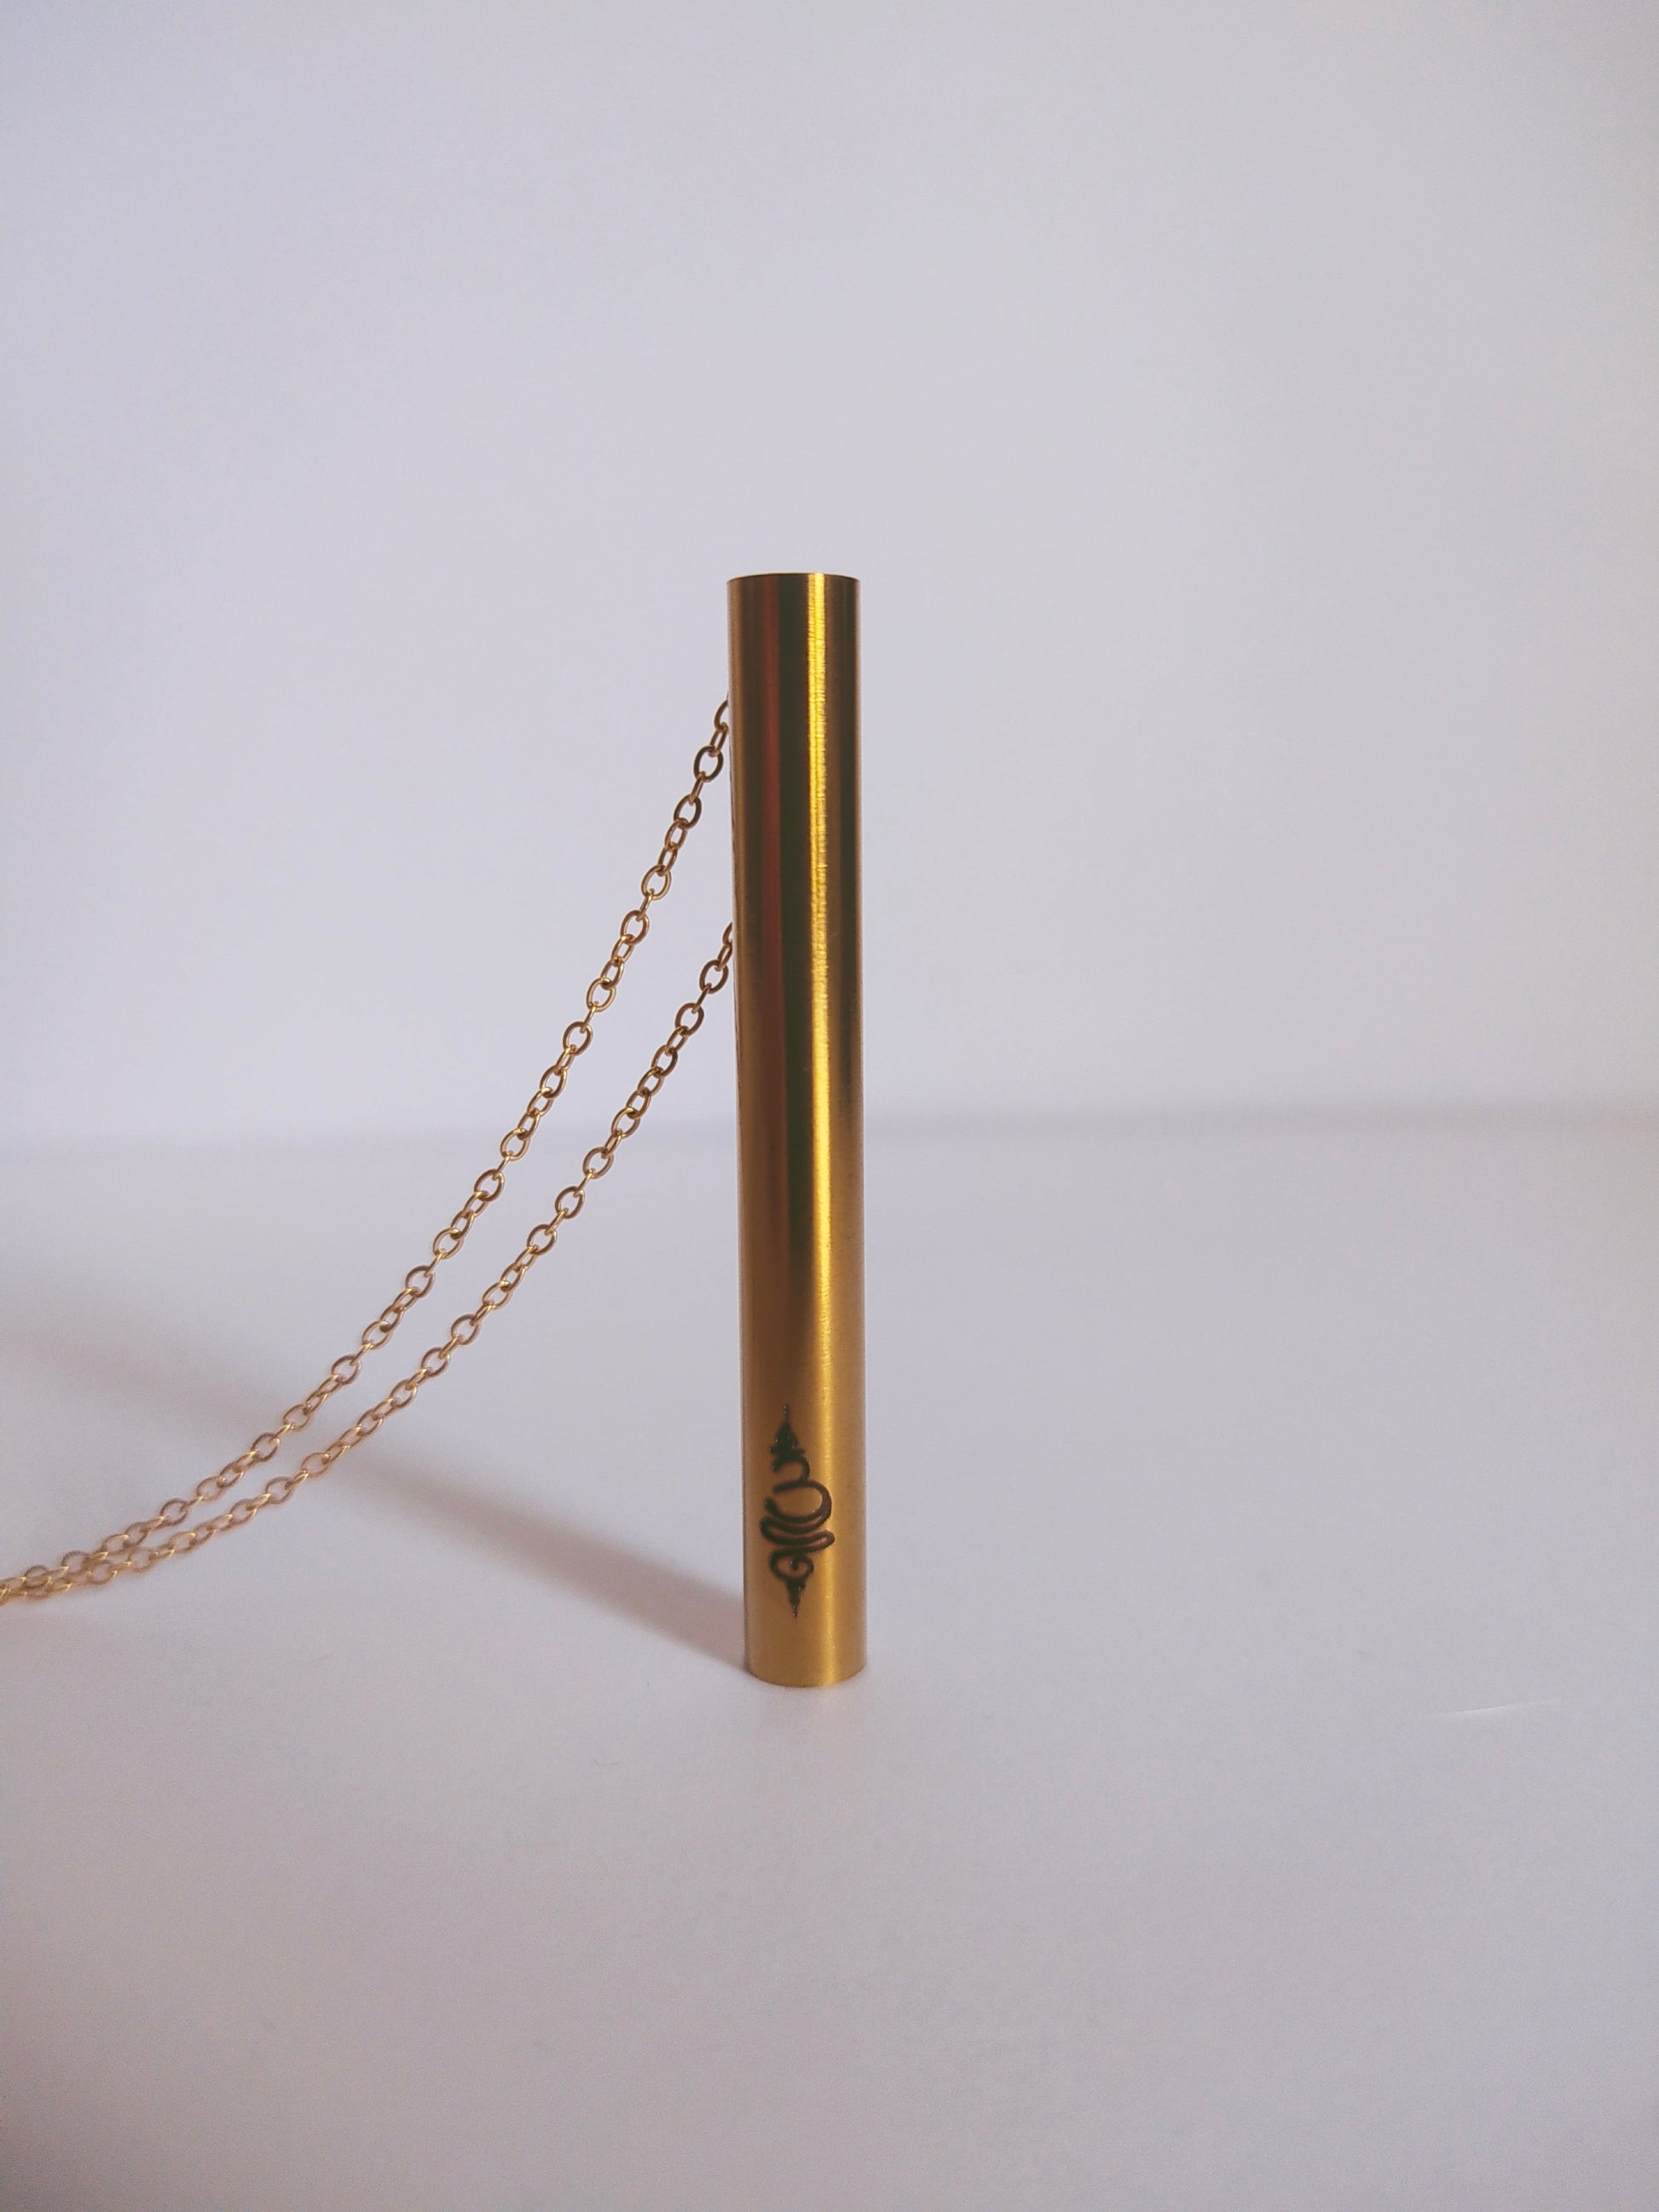 Stop Vaping Necklace- Anxiety Relief - Breathing Necklace - Stainless Steel Gold Colour - Without box - BreatheBuddy